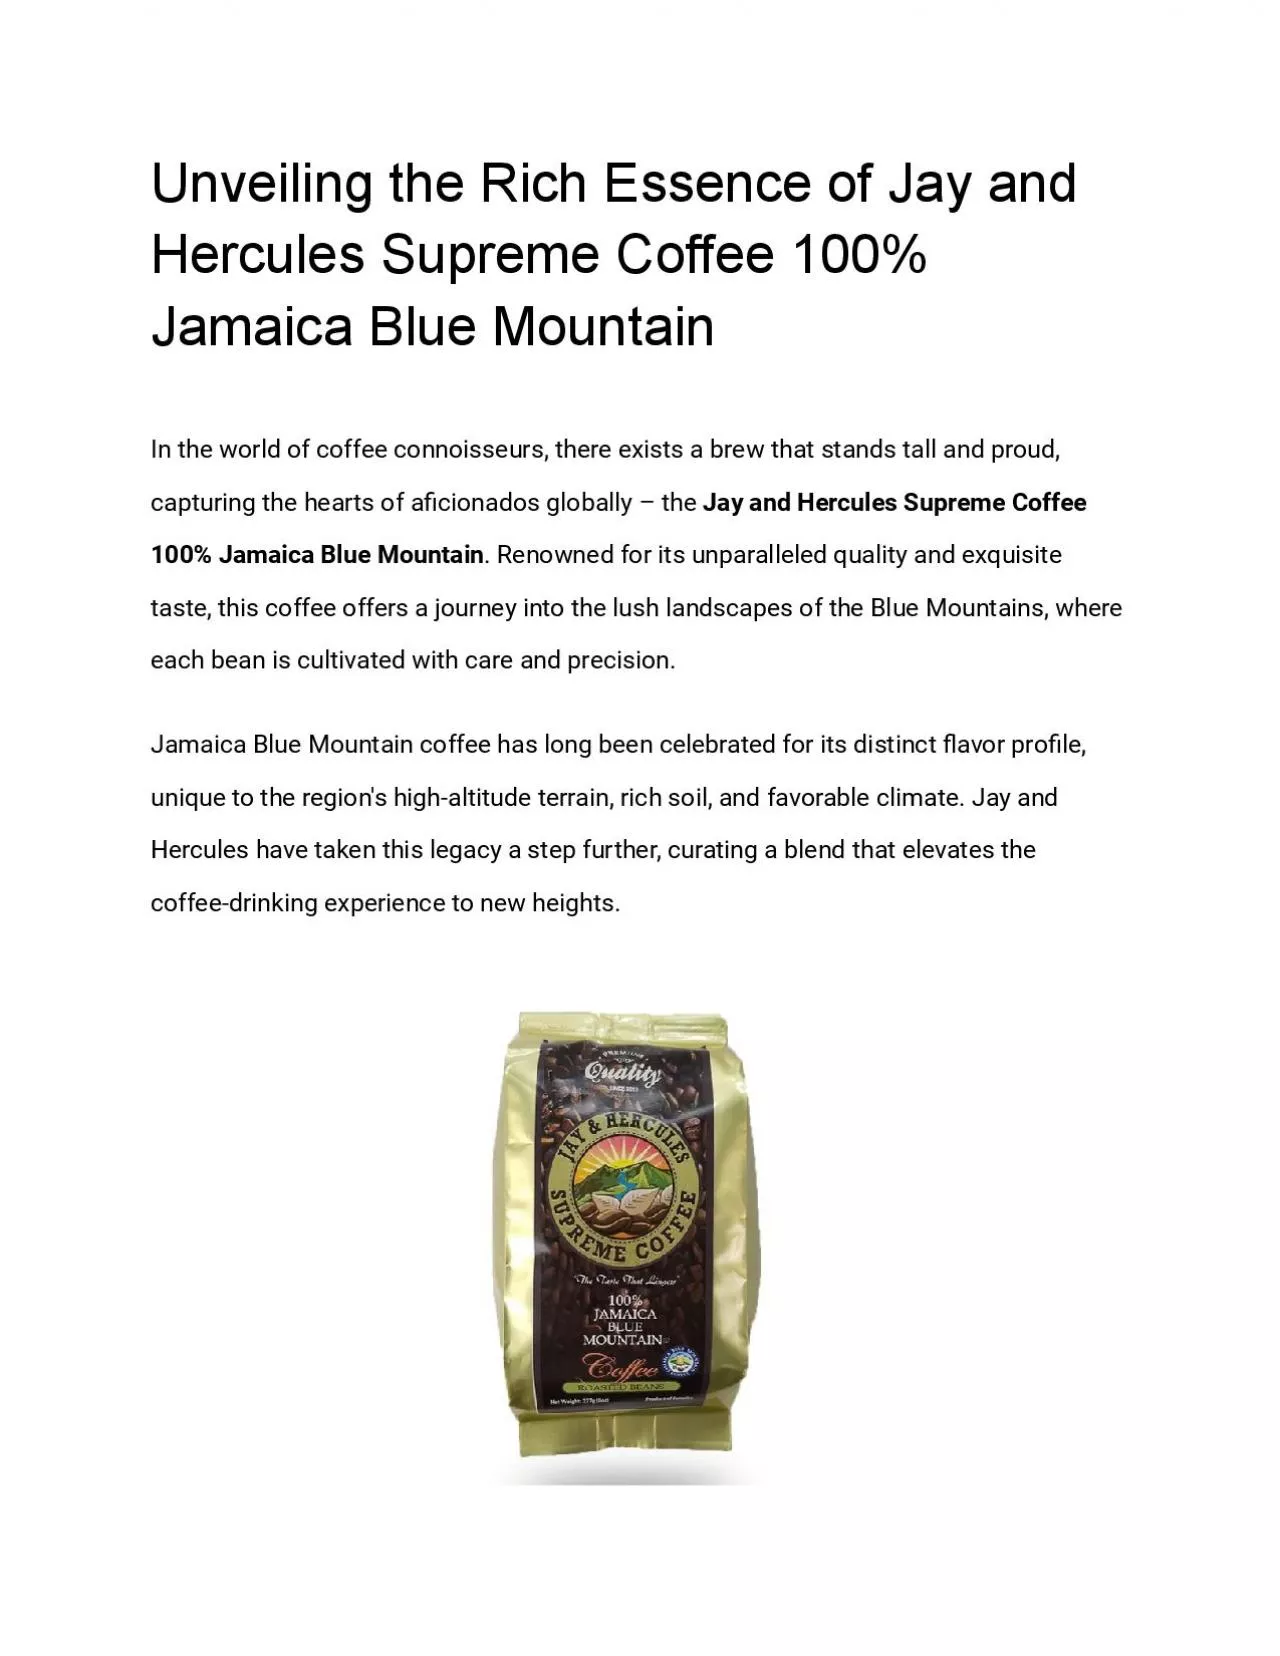 Unveiling the Rich Essence of Jay and Hercules Supreme Coffee 100% Jamaica Blue Mountain